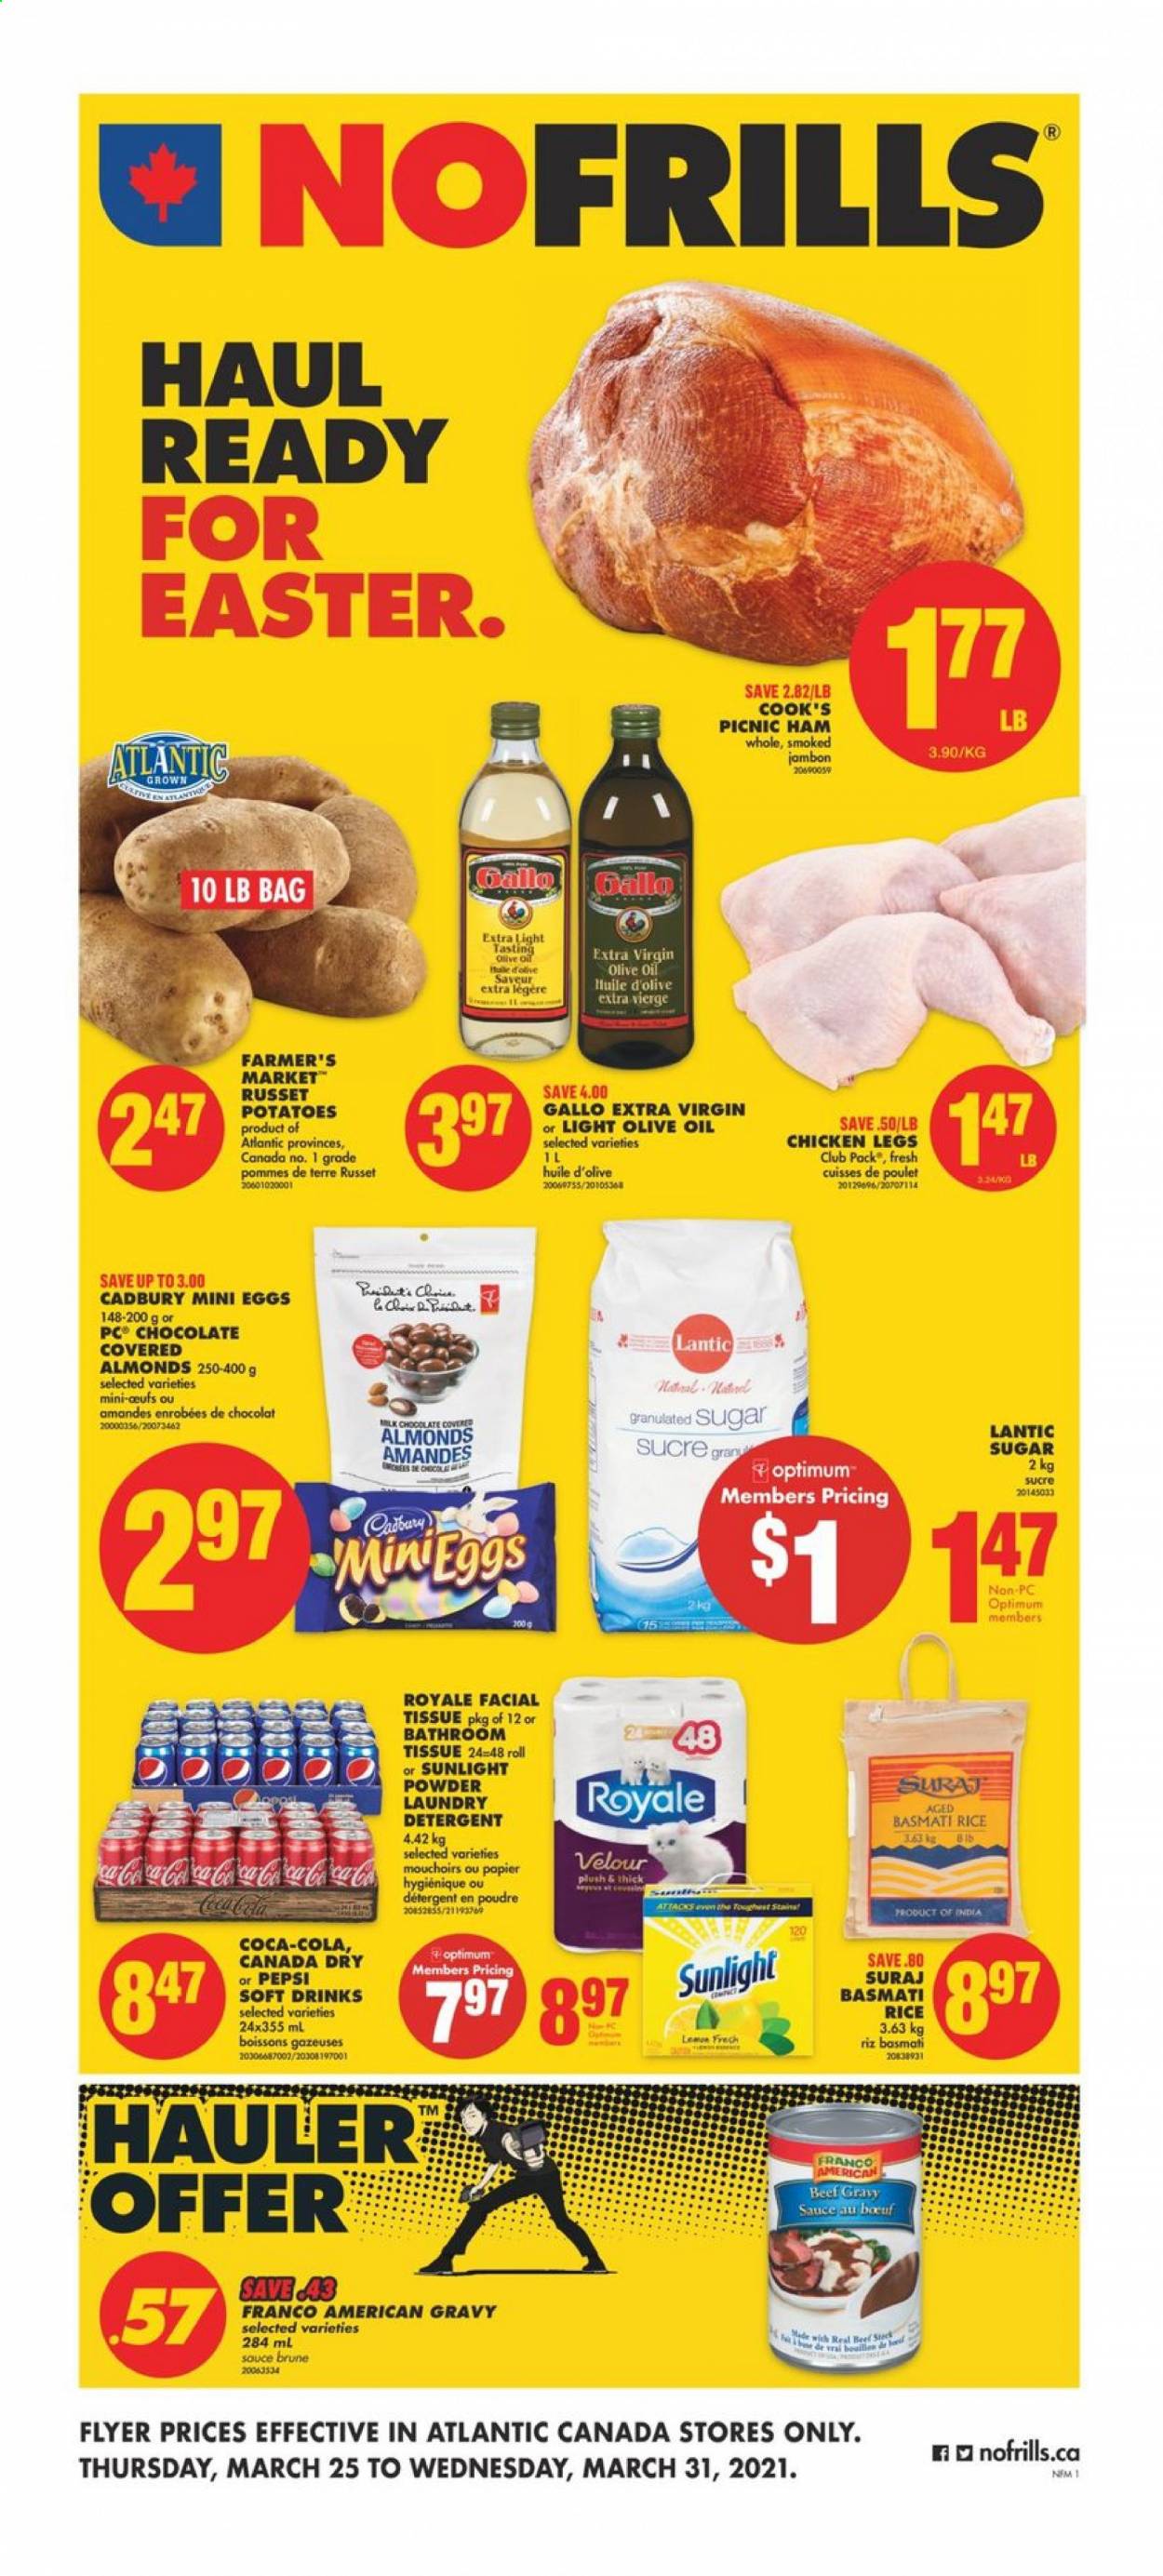 thumbnail - No Frills Flyer - March 25, 2021 - March 31, 2021 - Sales products - russet potatoes, potatoes, beef gravy, sauce, ham, Cook's, Cadbury, granulated sugar, sugar, basmati rice, rice, extra virgin olive oil, olive oil, oil, almonds, Canada Dry, Coca-Cola, Pepsi, soft drink, chicken legs, chicken, bath tissue, laundry detergent, Sunlight, Optimum, bib. Page 1.